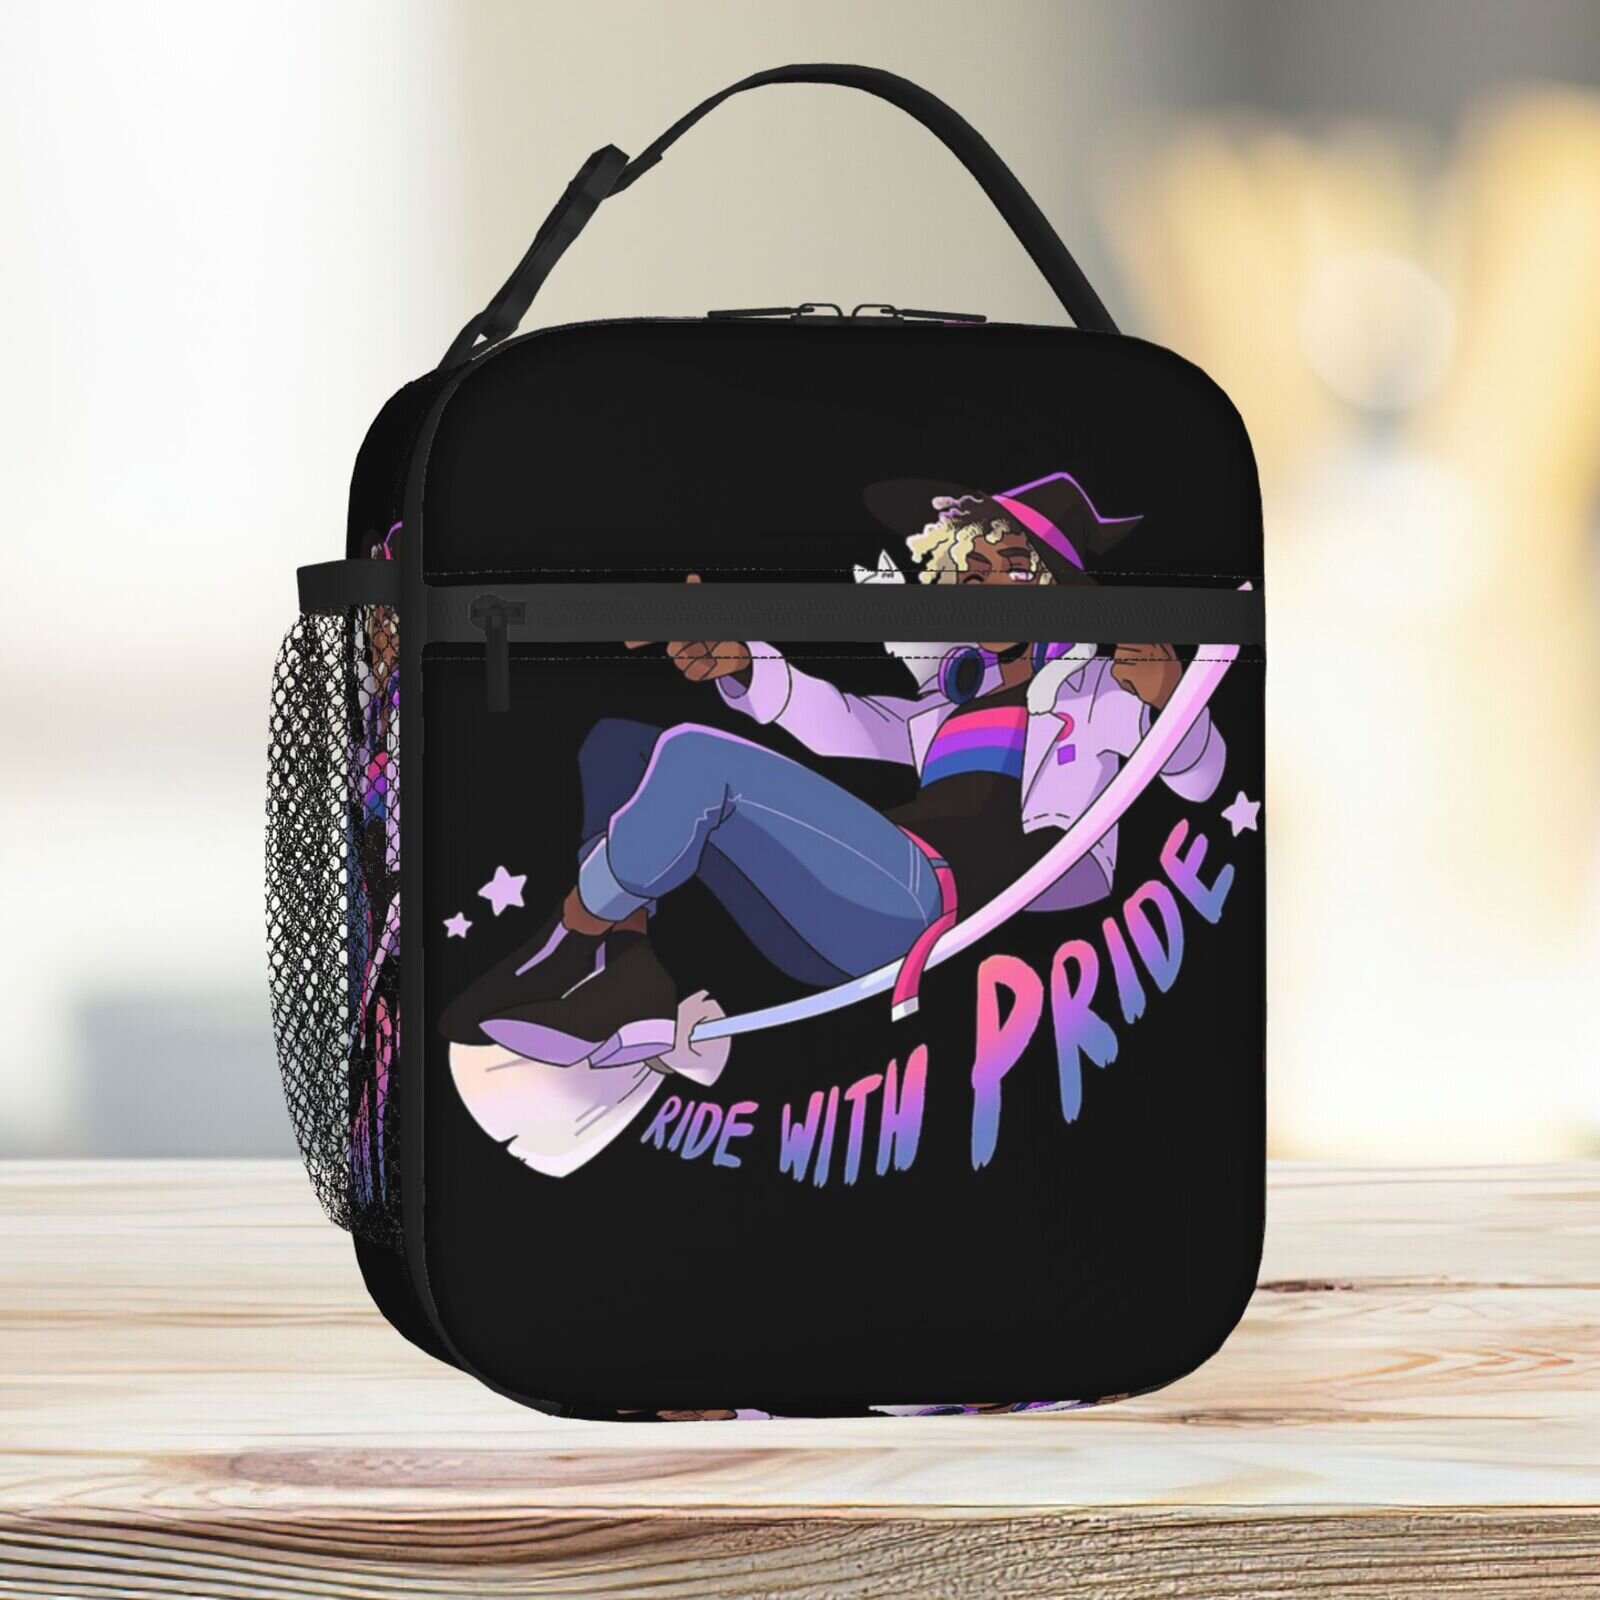 Lunch Bag Ride With Pride - Bi Tote Insulated Cooler Kids School Travel